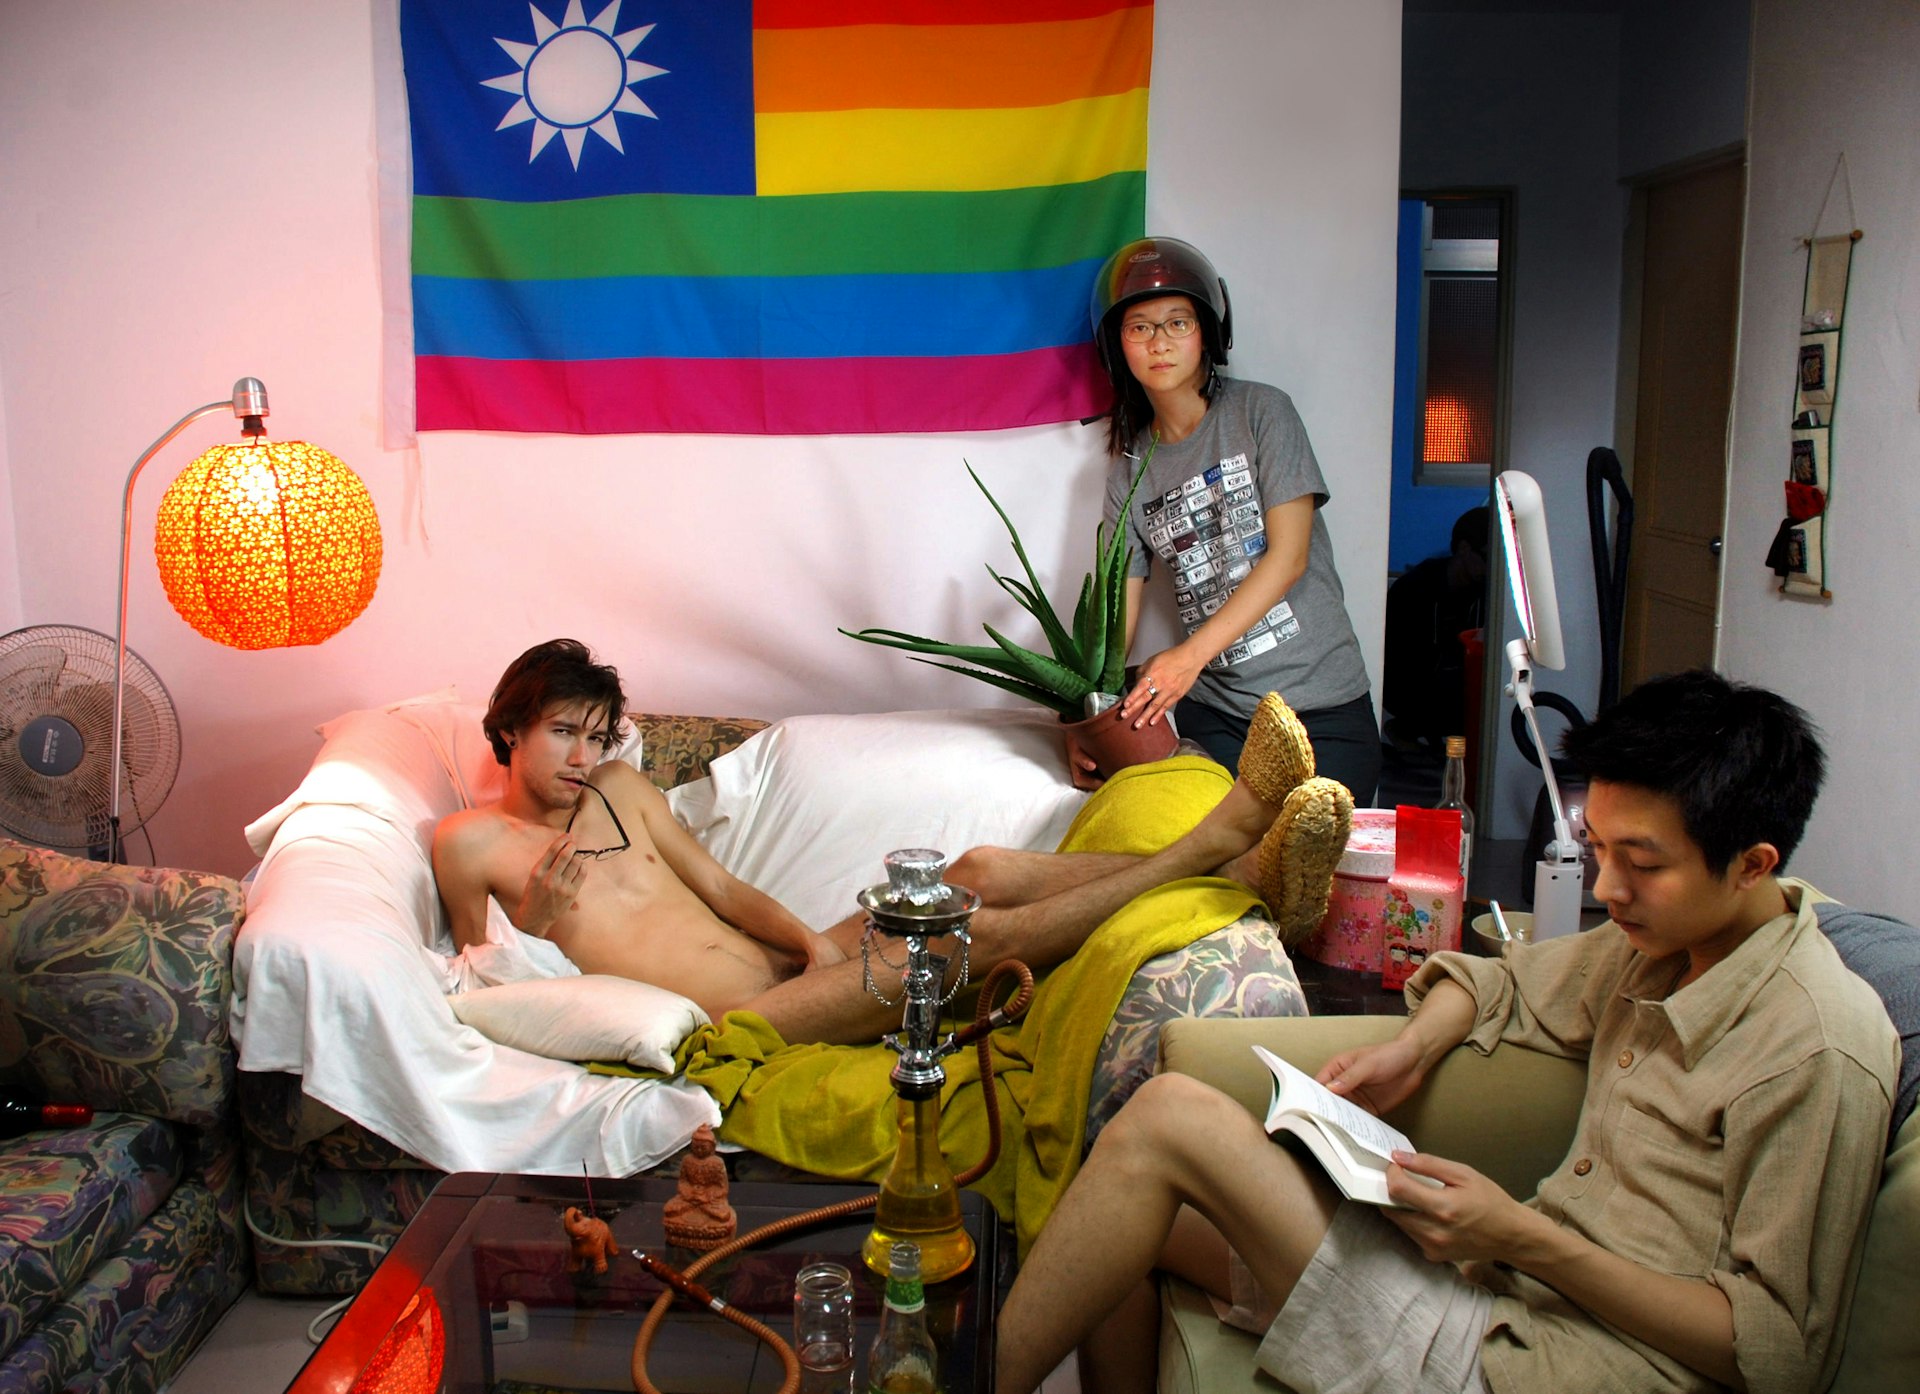 Asia’s first major LGBTQ exhibition is opening this week